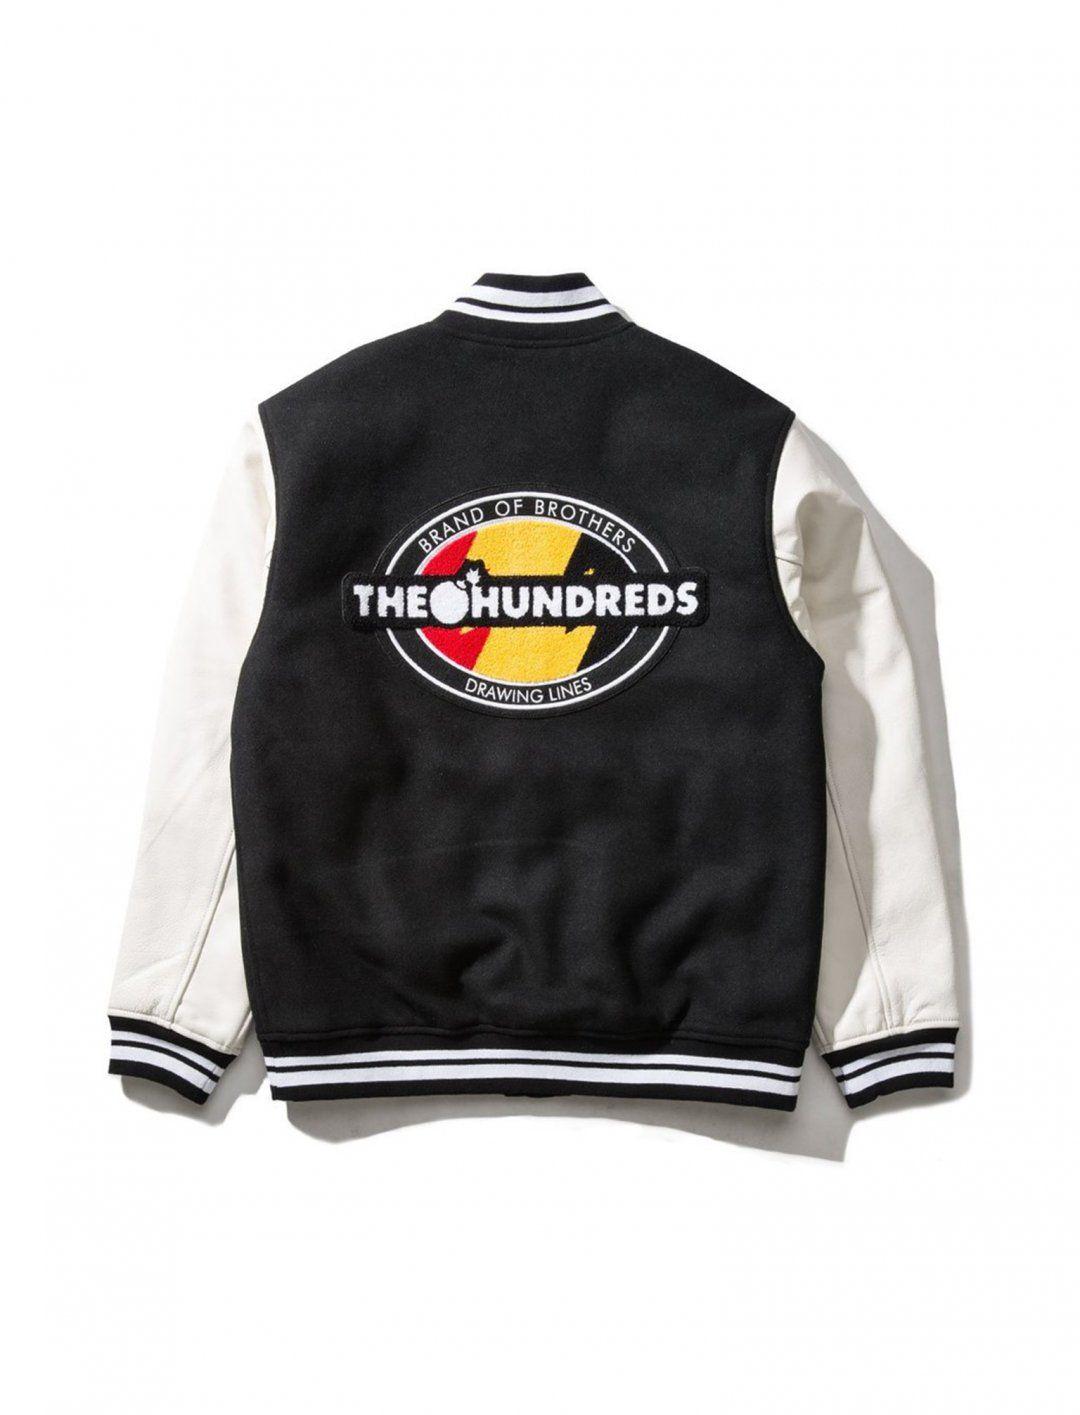 Hundreds Drawing Logo - Gashi Jacket, Crew Style from The Hundreds - No Face No Care Music Video